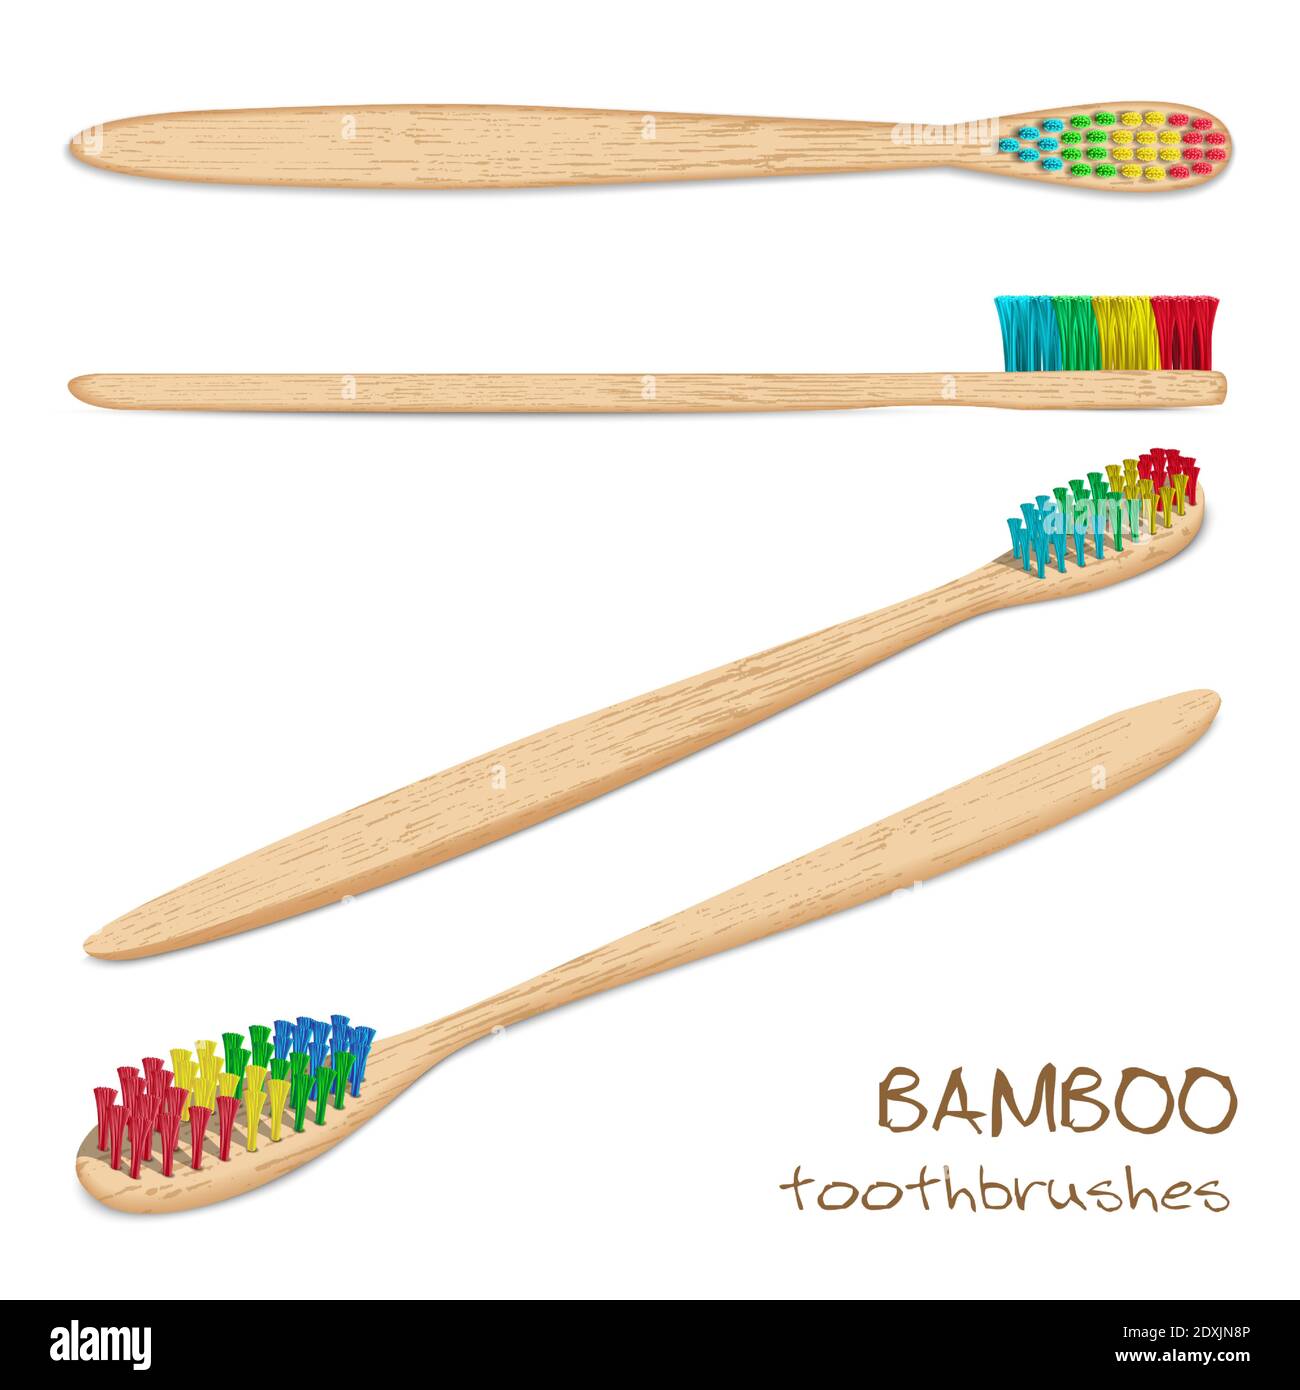 Bamboo toothbrushes. Varicoloured, natural bristle. Zero waste, Biodegradable material. Eco-friendly products. Isolated on white background. Different Stock Vector